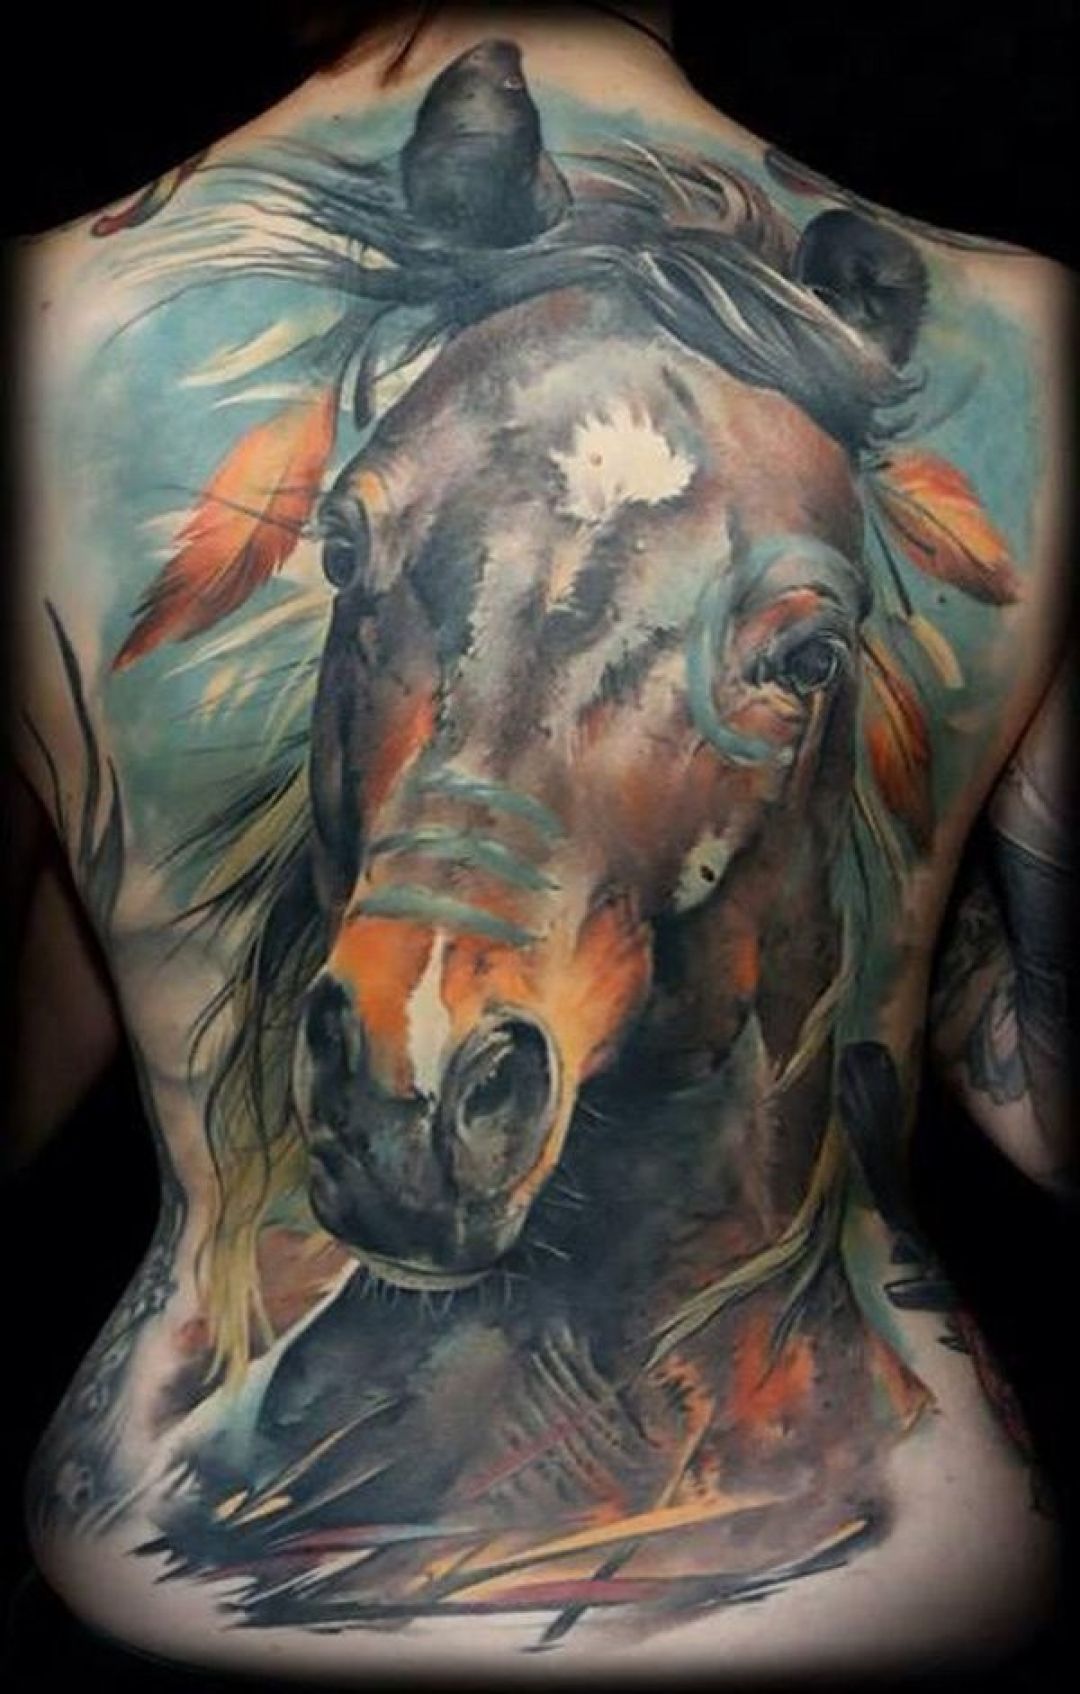 Indian Girl with Three Horses by Jin O TattooNOW